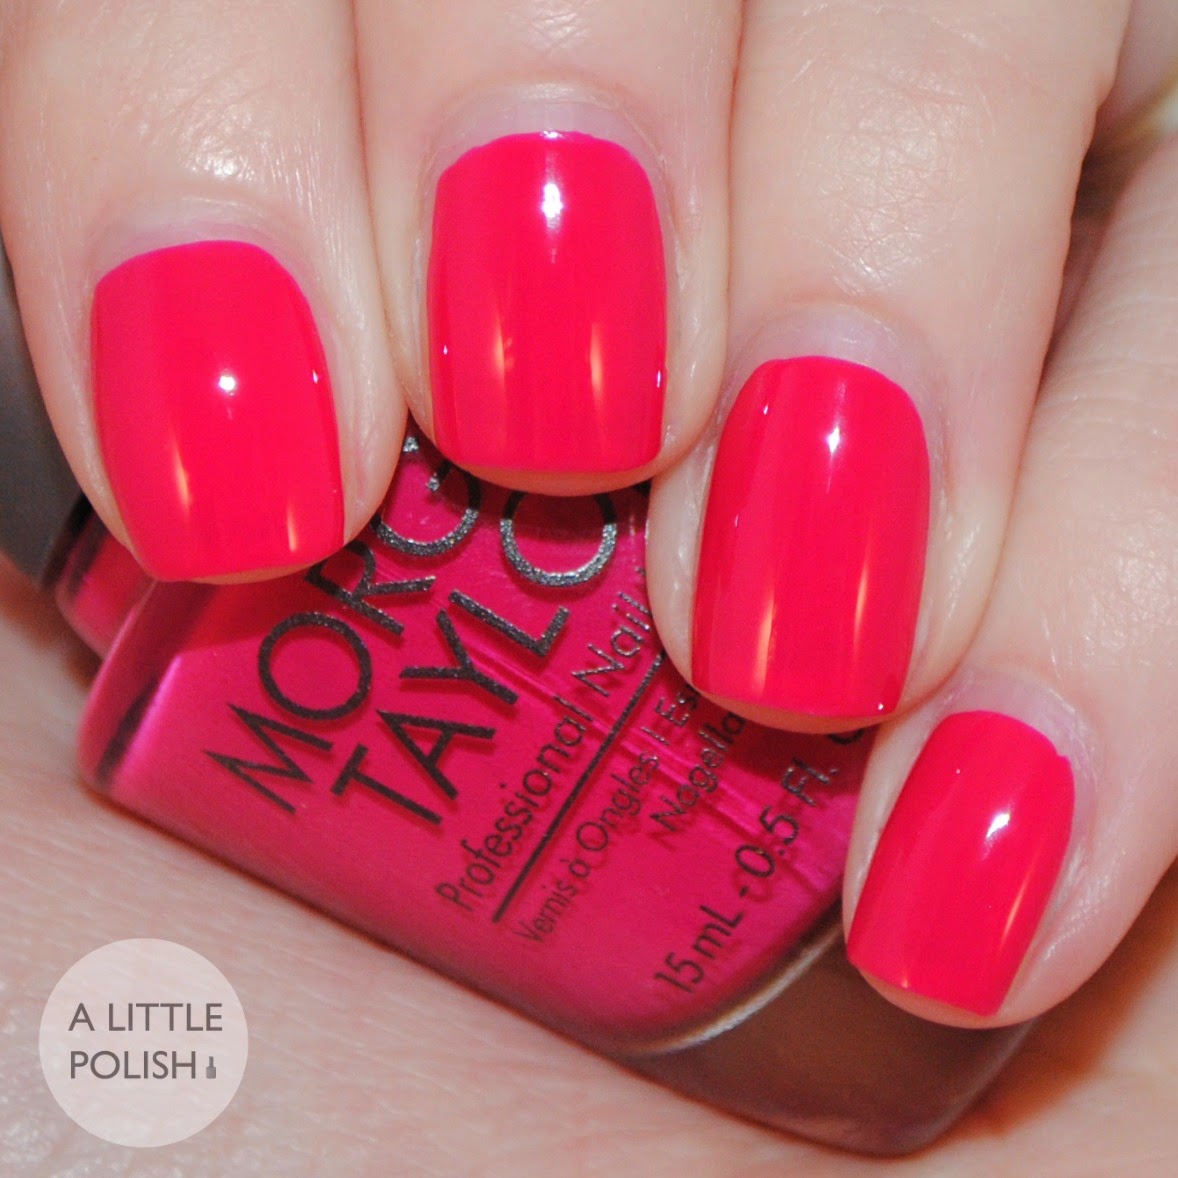 A Little Polish: Morgan Taylor - Swatches & Review